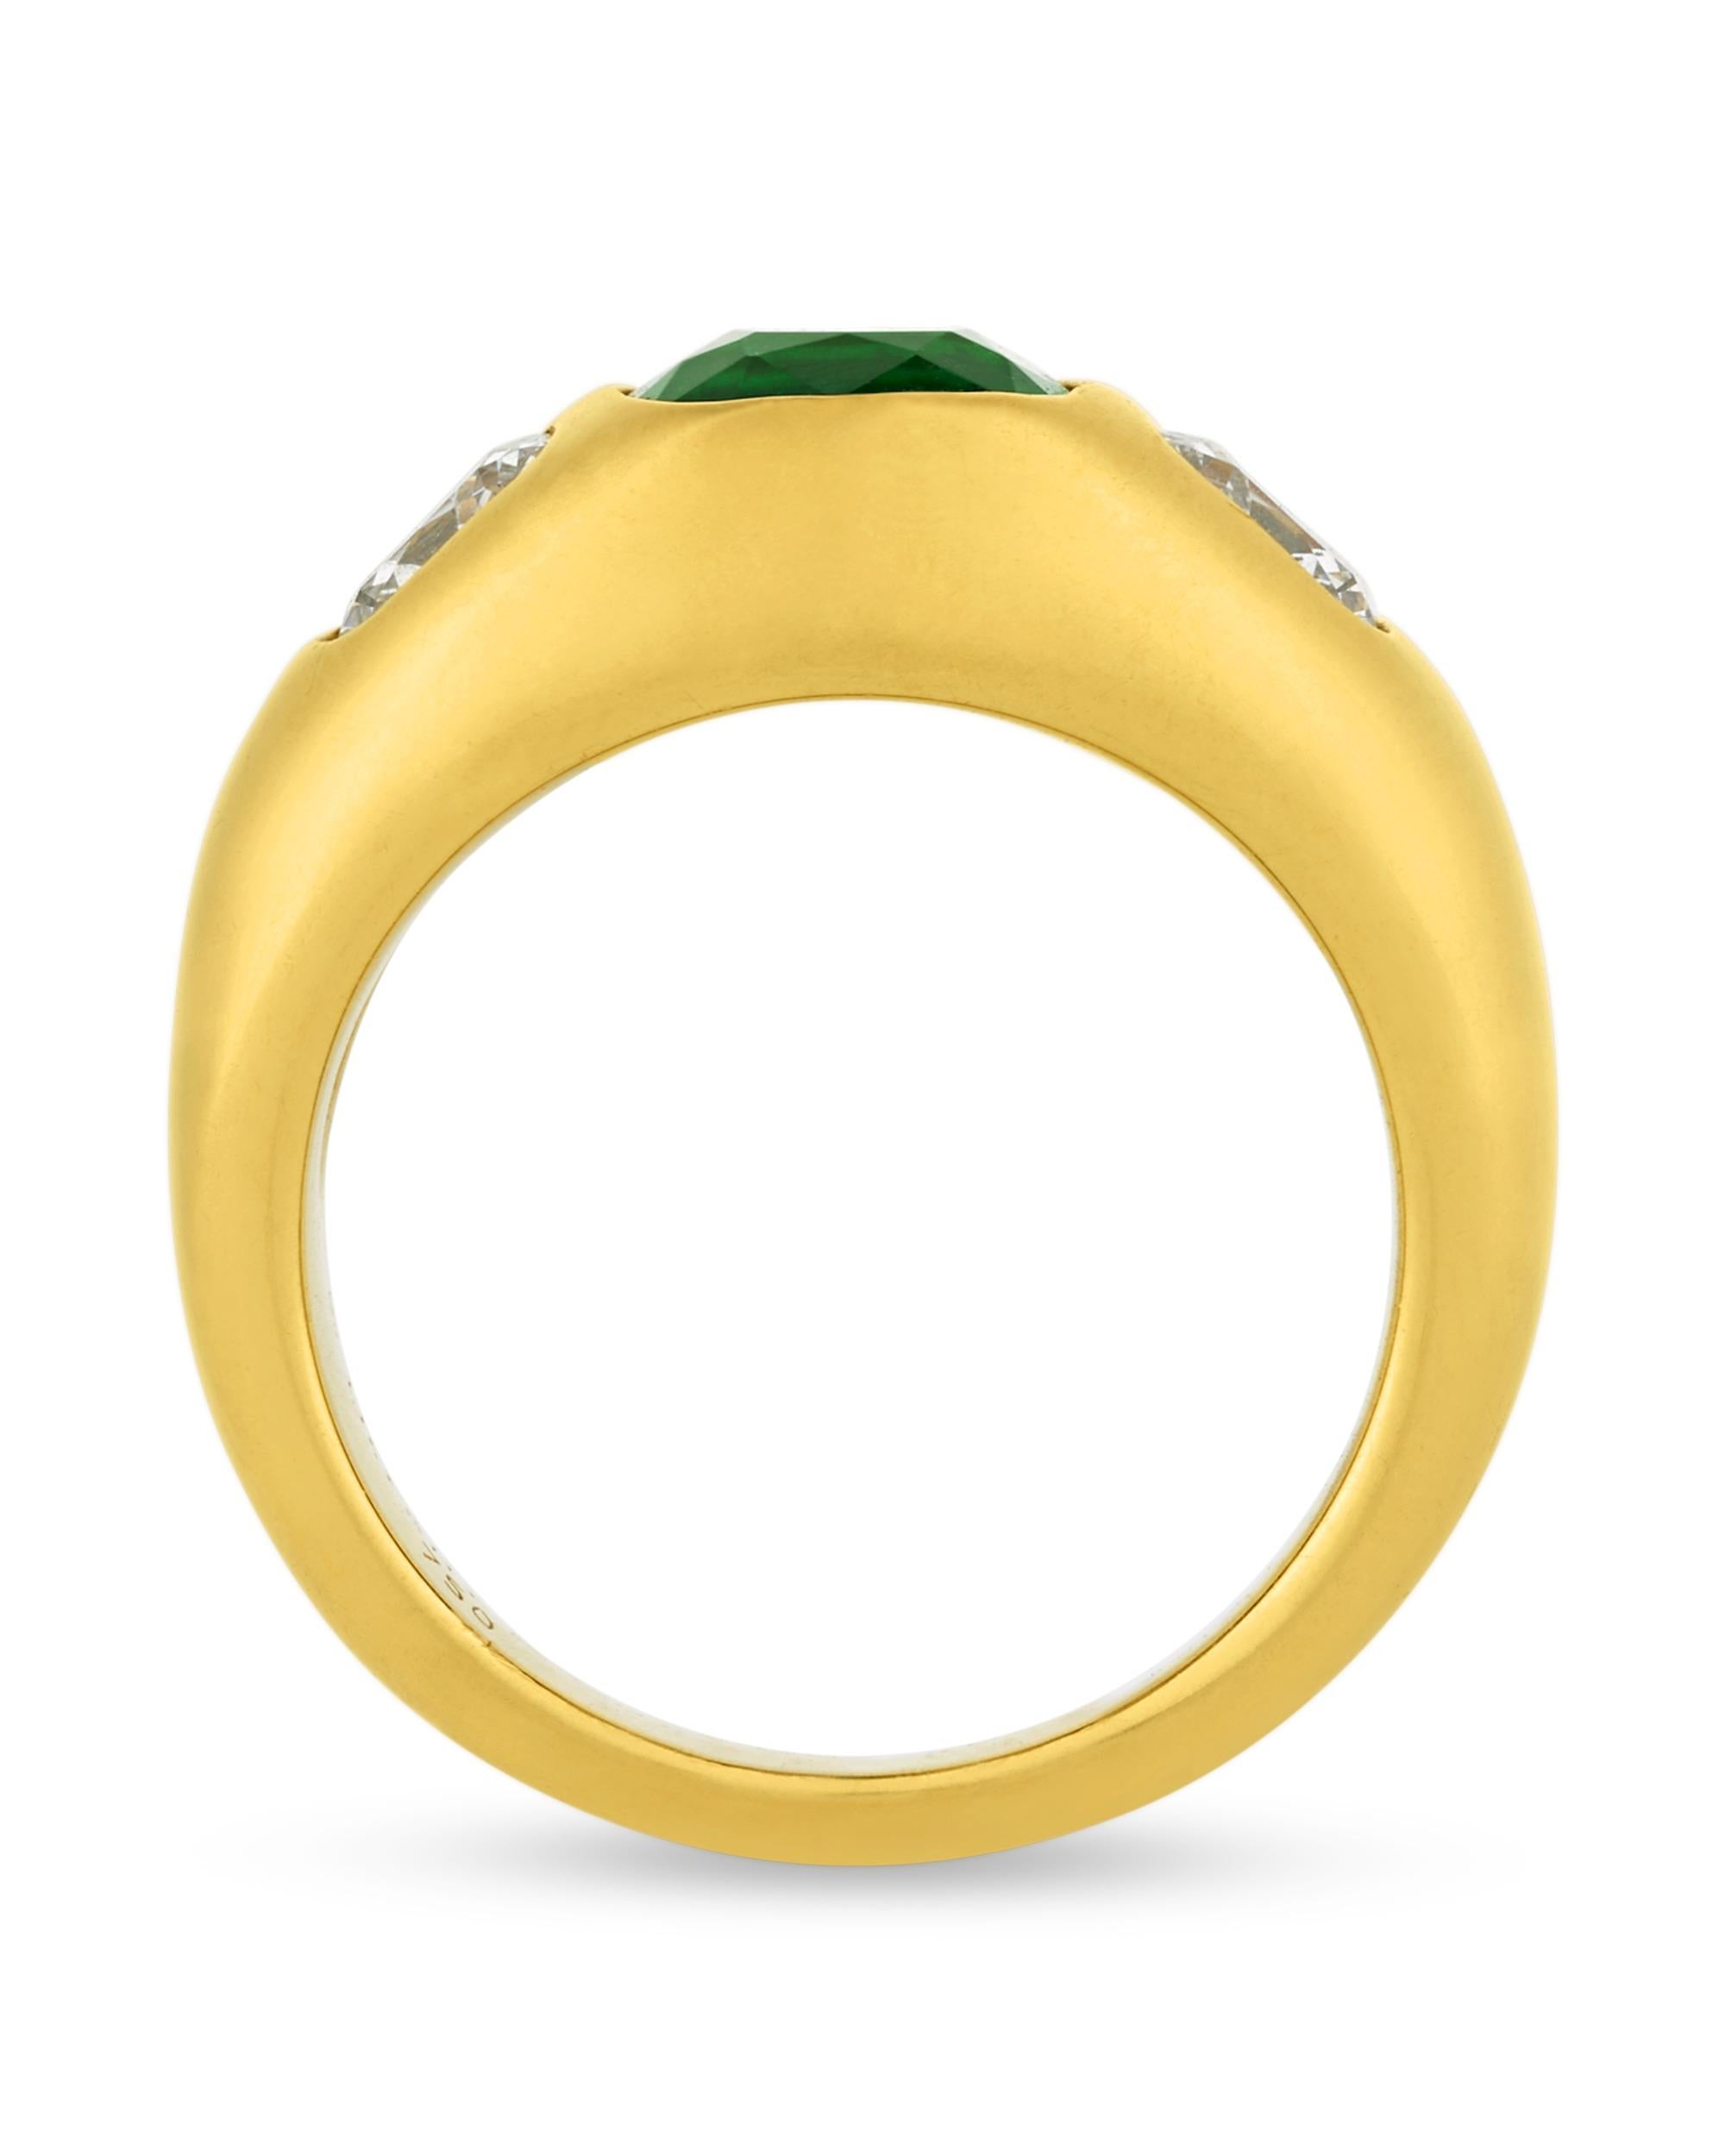 Displaying a striking vivid green color, an approximately 1.90-carat antique cushion-cut emerald lies at the center of this domed ring. This gemstone is certified by the Swiss Gemmological Institute as being Zambian in origin, with no indications of